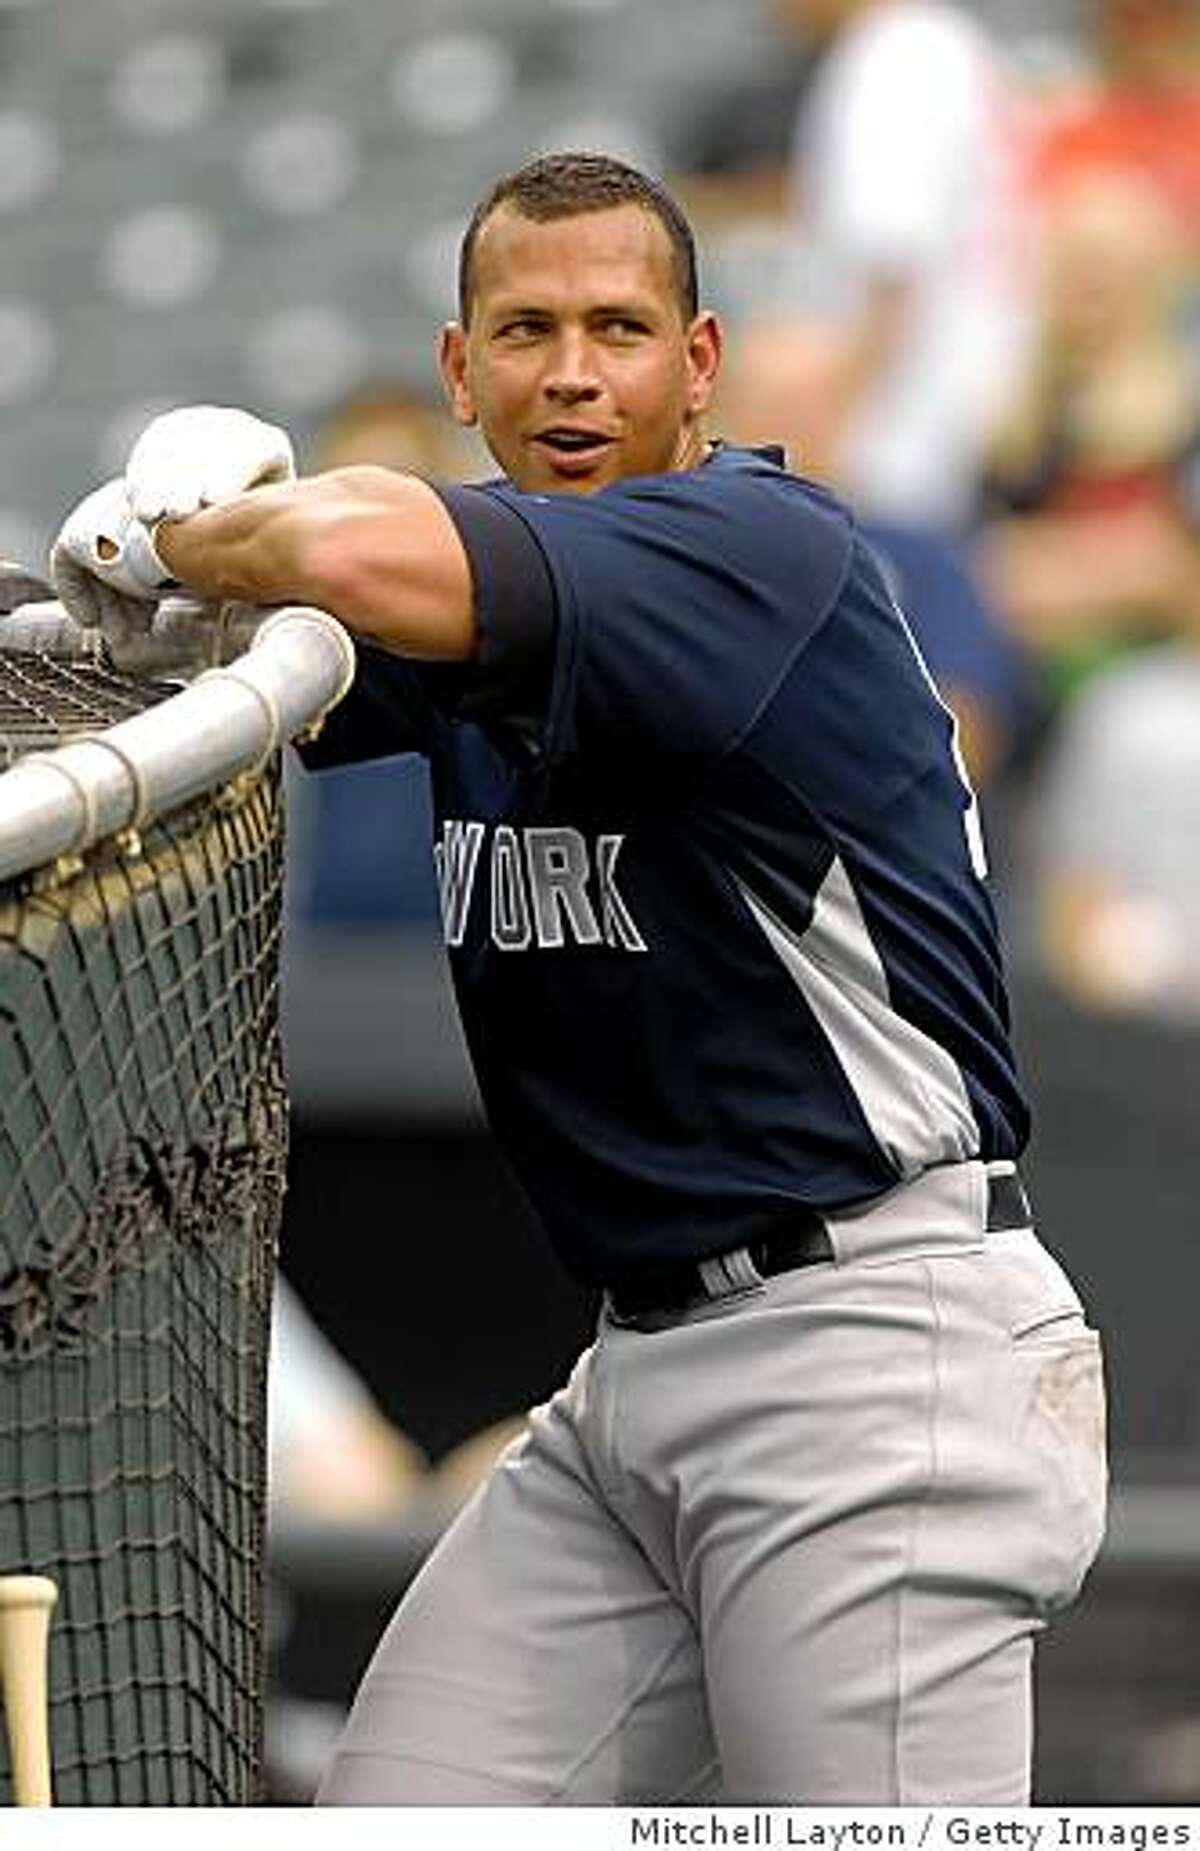 BALTIMORE, MD - MAY 8: Alex Rodriguez #13 of the New York Yankees looks on before his first game of the season against the Baltimore Orioles on May 8, 2009 at Camden Yards in Baltimore, Maryland. (Photo by Mitchell Layton/Getty Images)